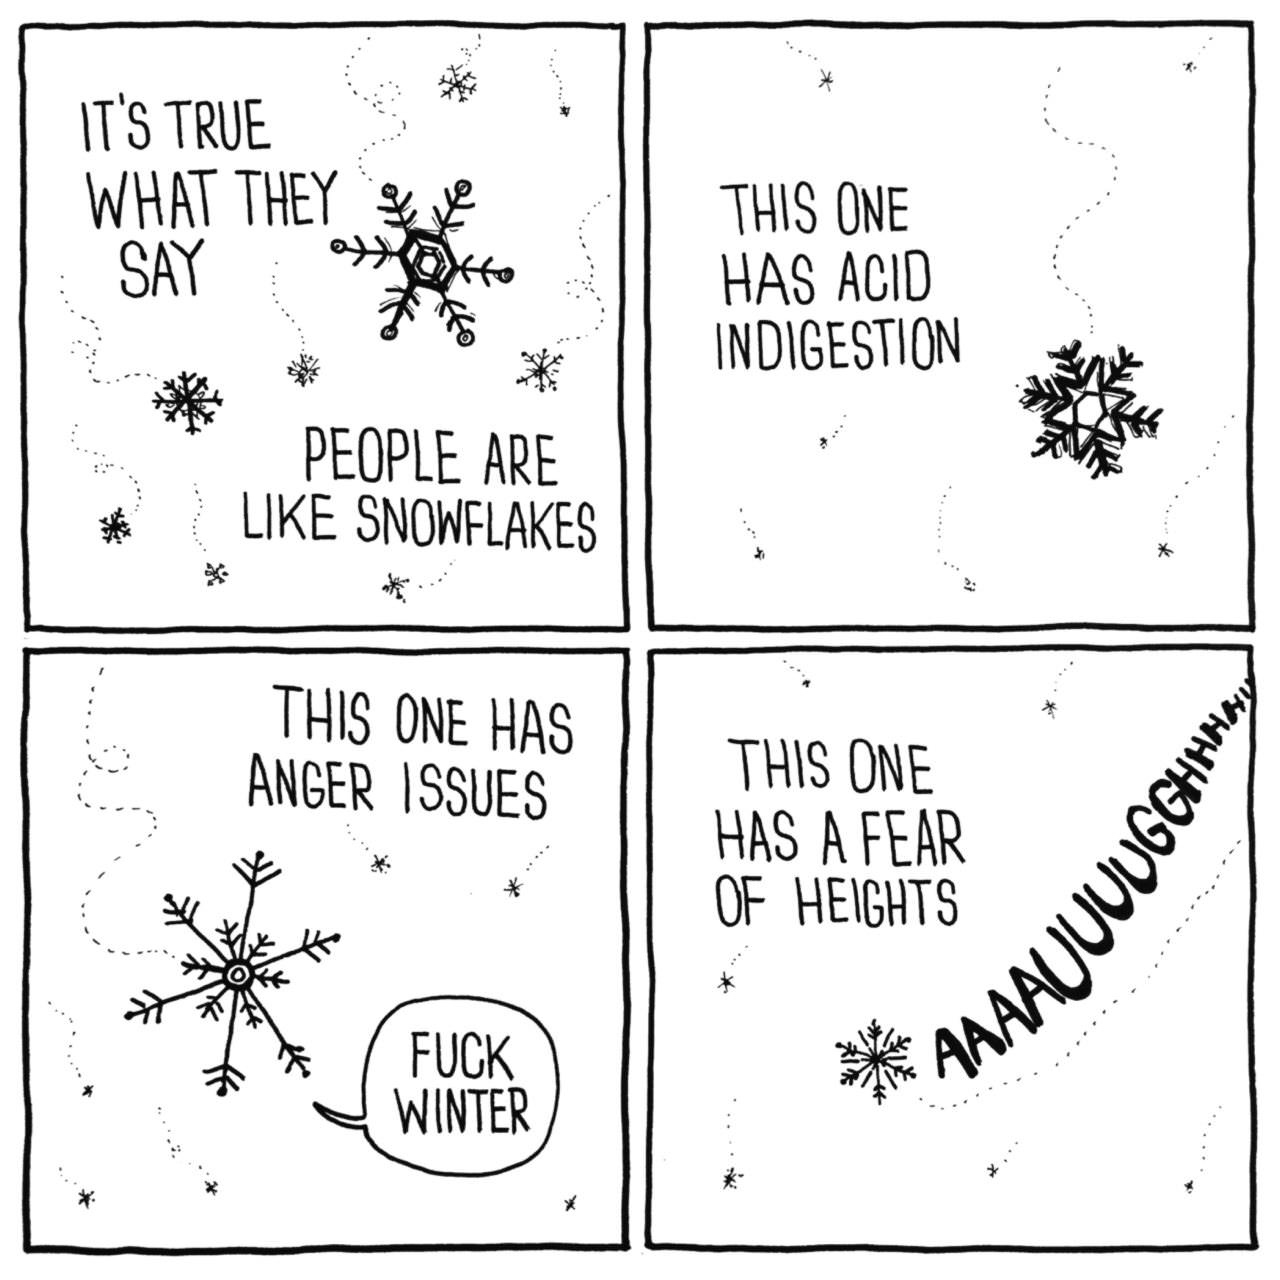 memes - snowflakes are like people comic - It'S True What They X ve Sayo to This One Has Acid Indigestion People Are Snowflakes This One Has Anger Issues This One Has A Fear Of Heights I Fuck Winter Aaaauuudos